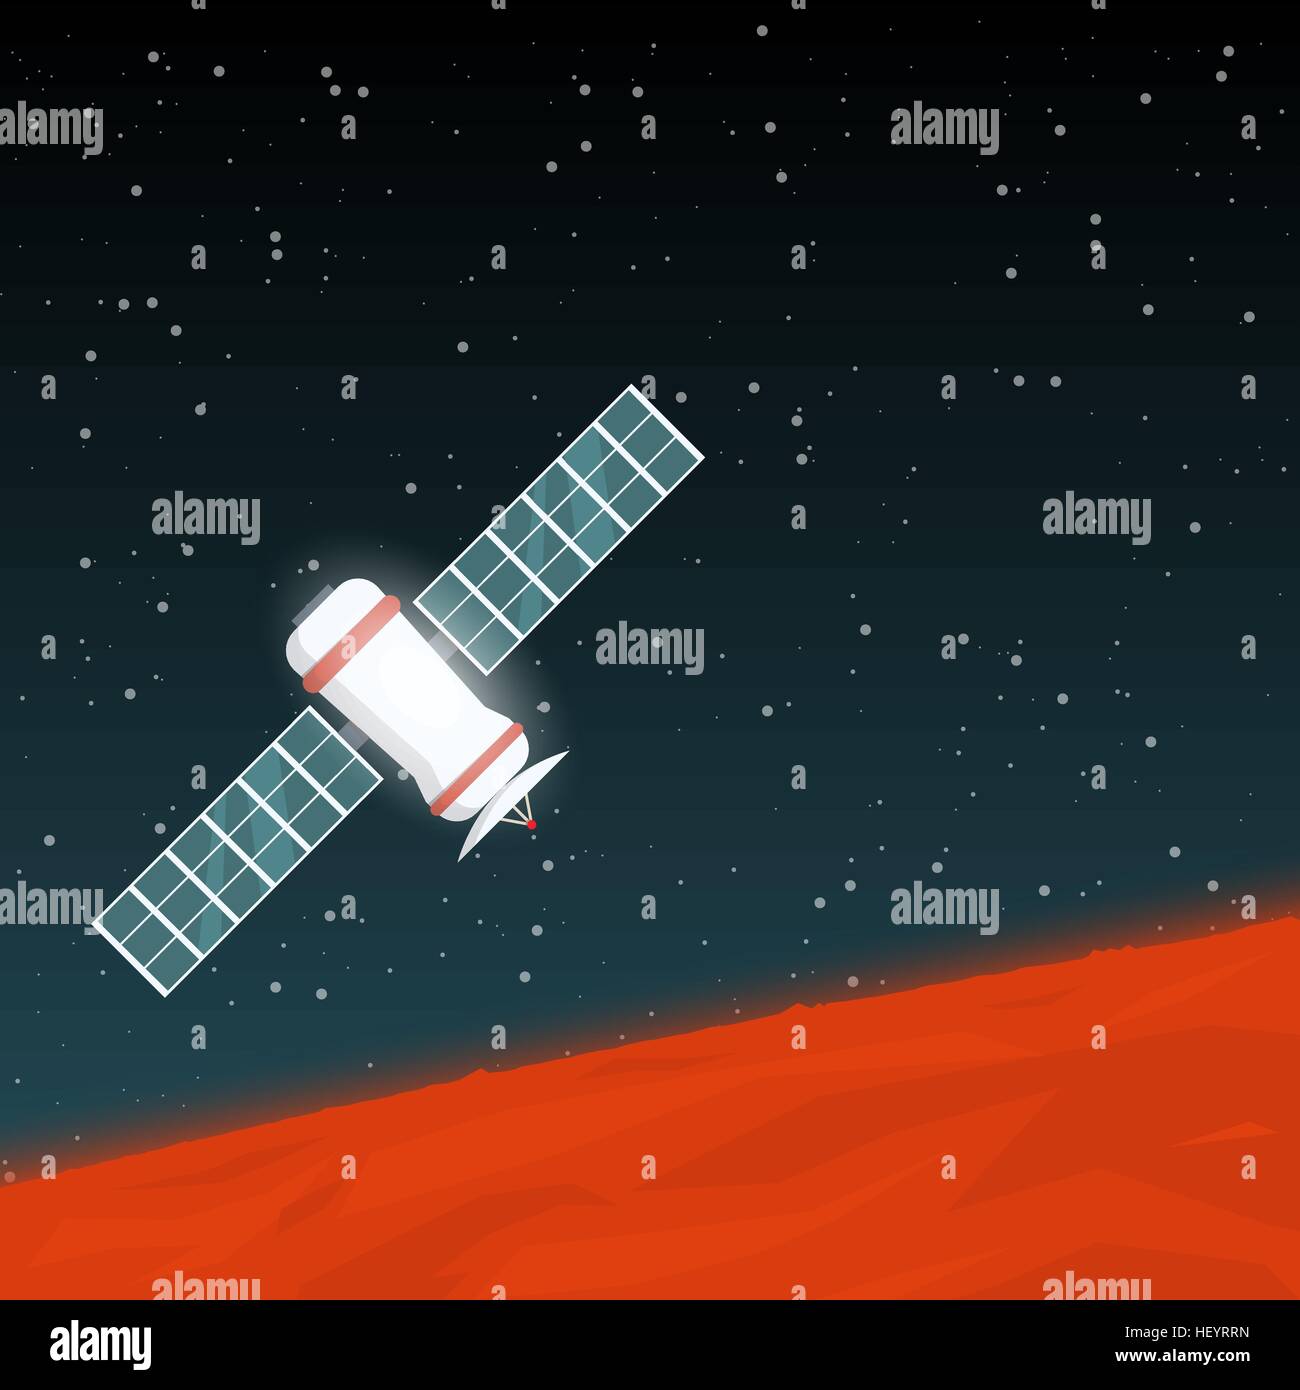 Space probe flying in space near red planet like Mars, with solar panels and satellite antenna, glowing in the dark. Stock Vector